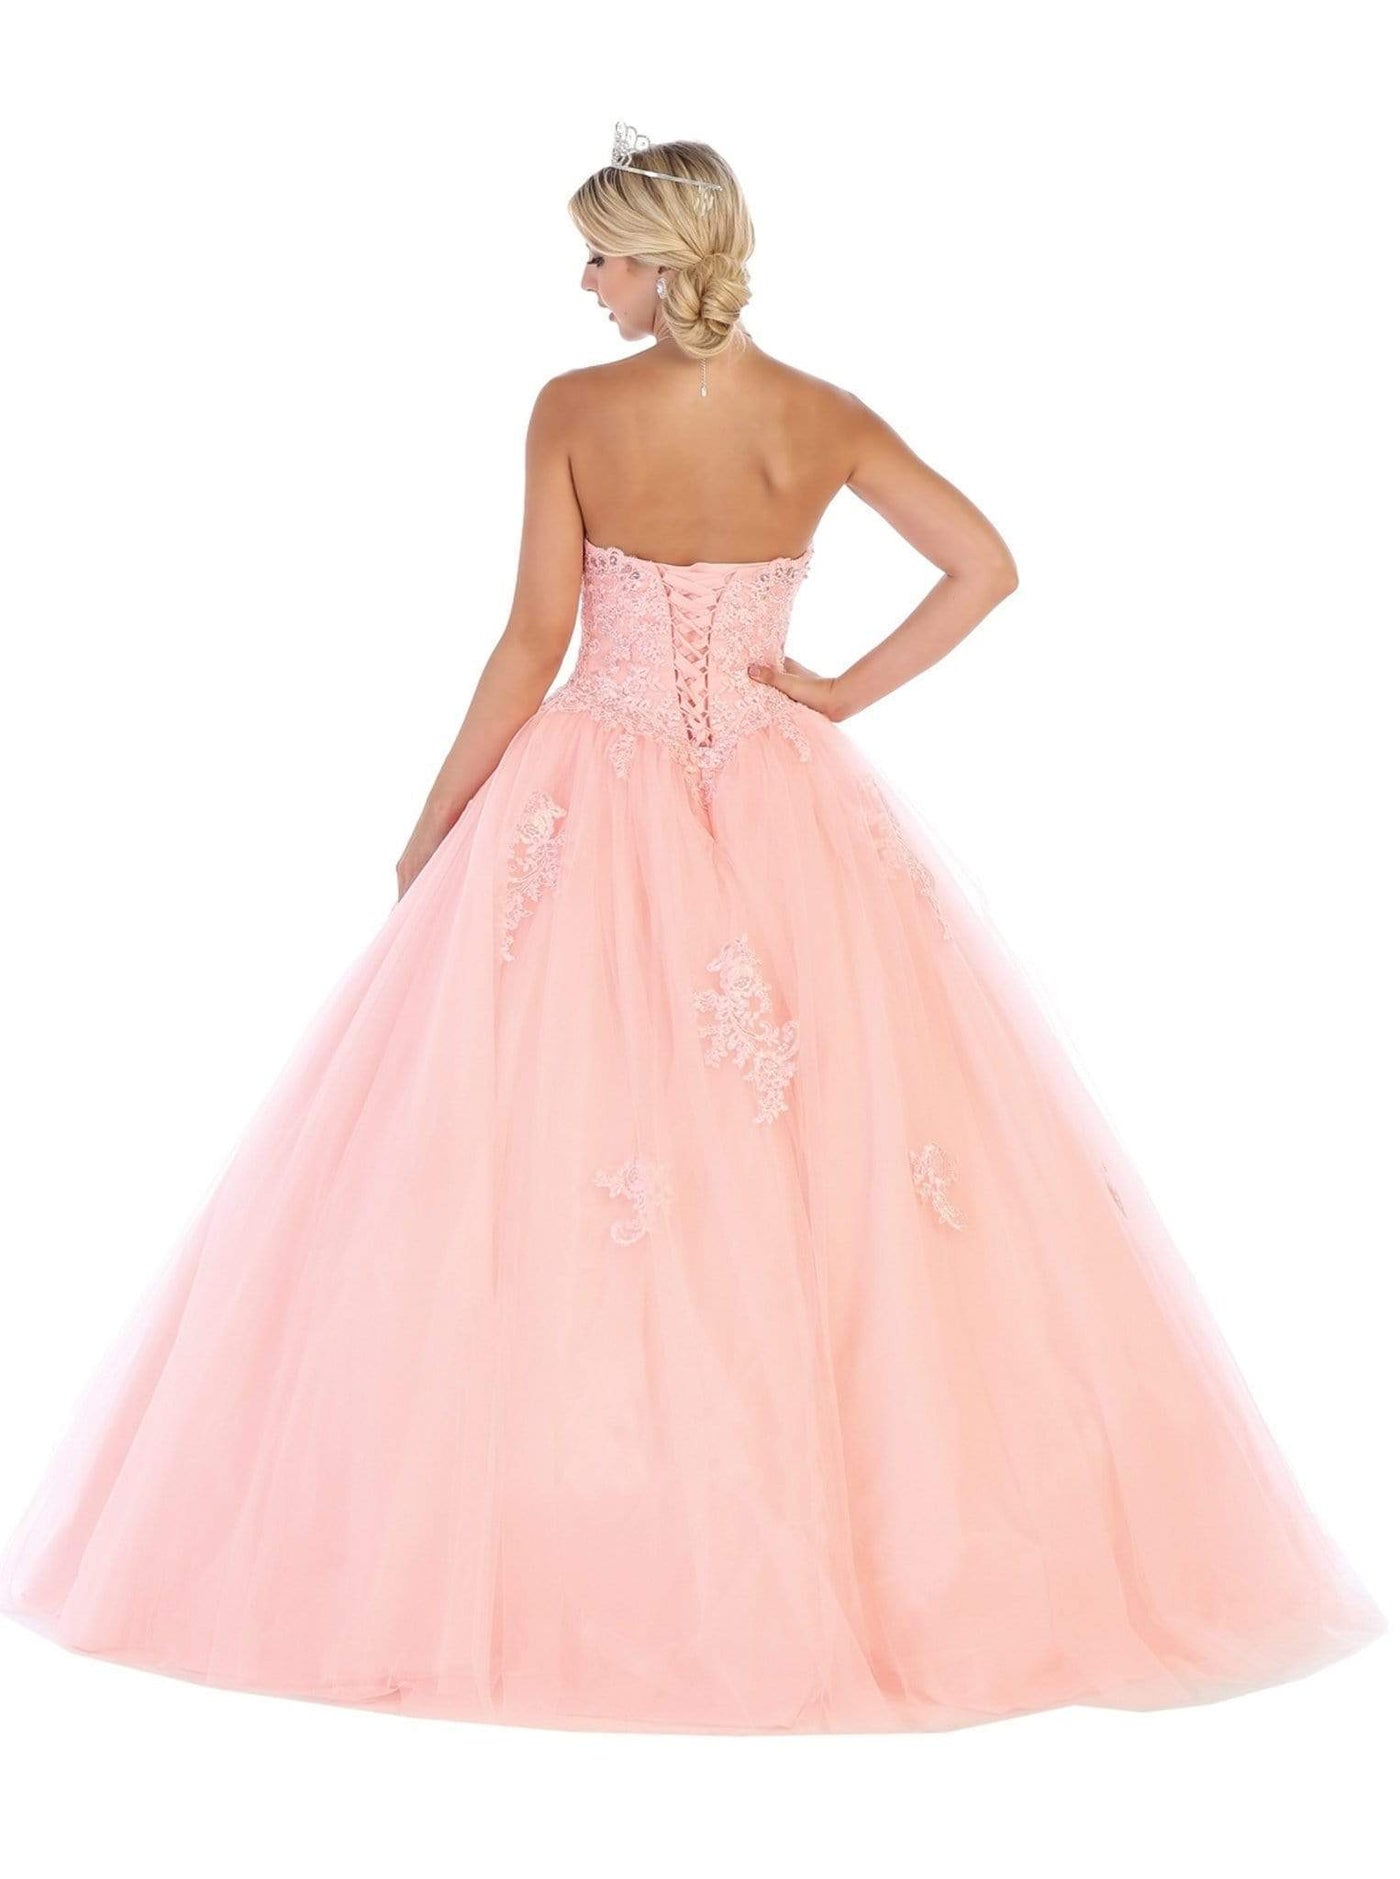 May Queen - LK107 Strapless Scalloped Corset Appliqued Ballgown Special Occasion Dress